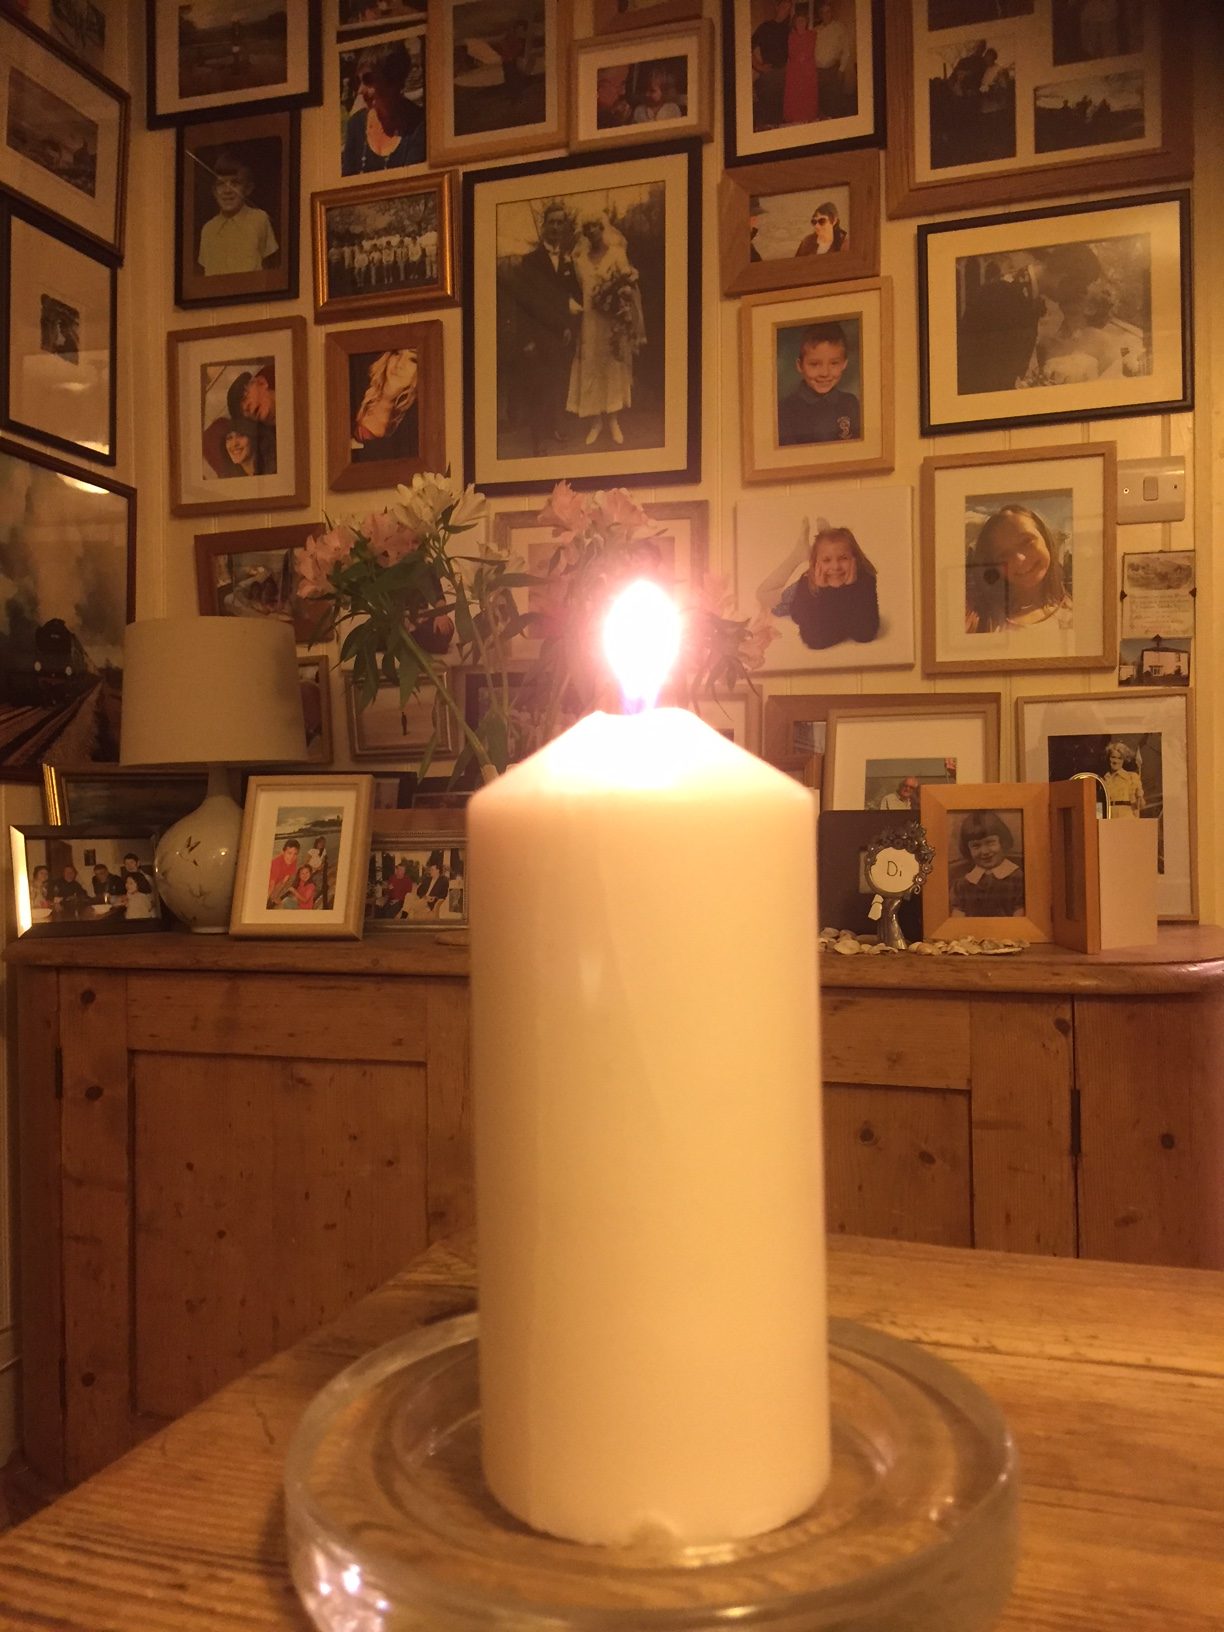 Lighting a Candle for Diddley.